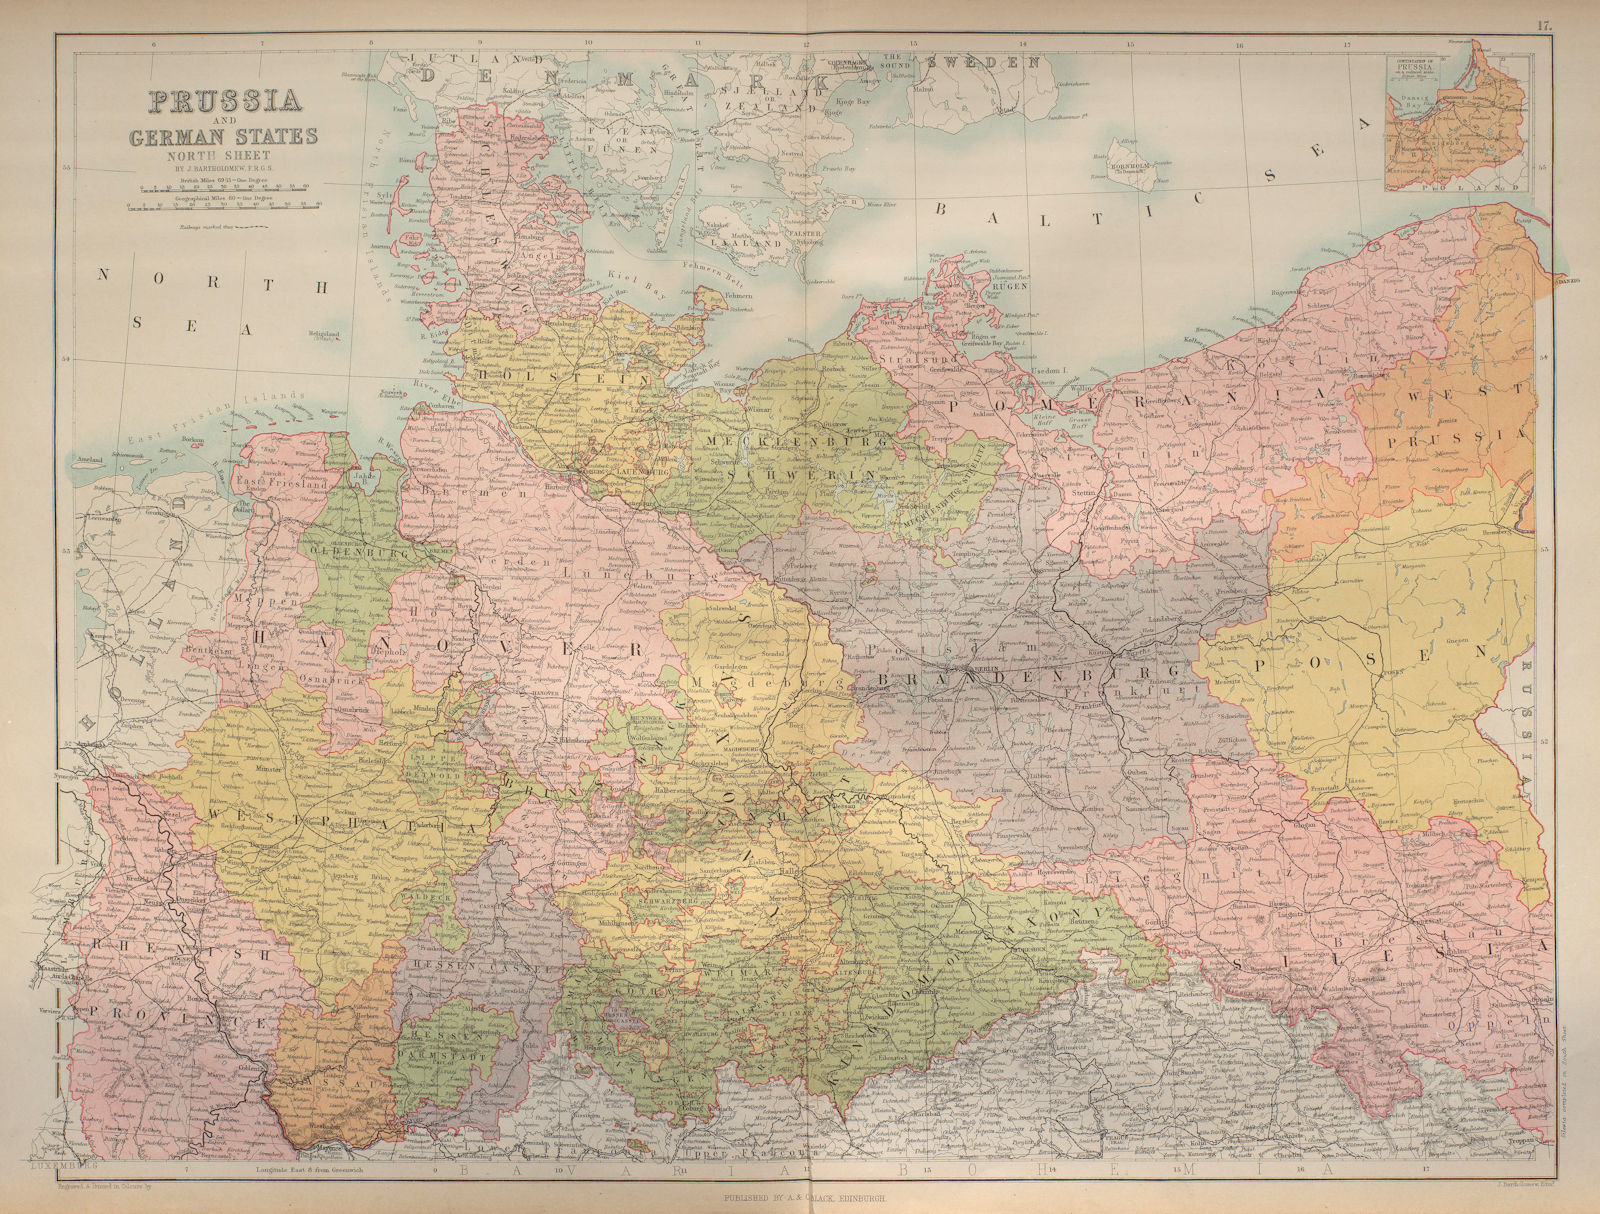 Associate Product Prussia & North German states. Germany & Poland. BARTHOLOMEW 1870 old map